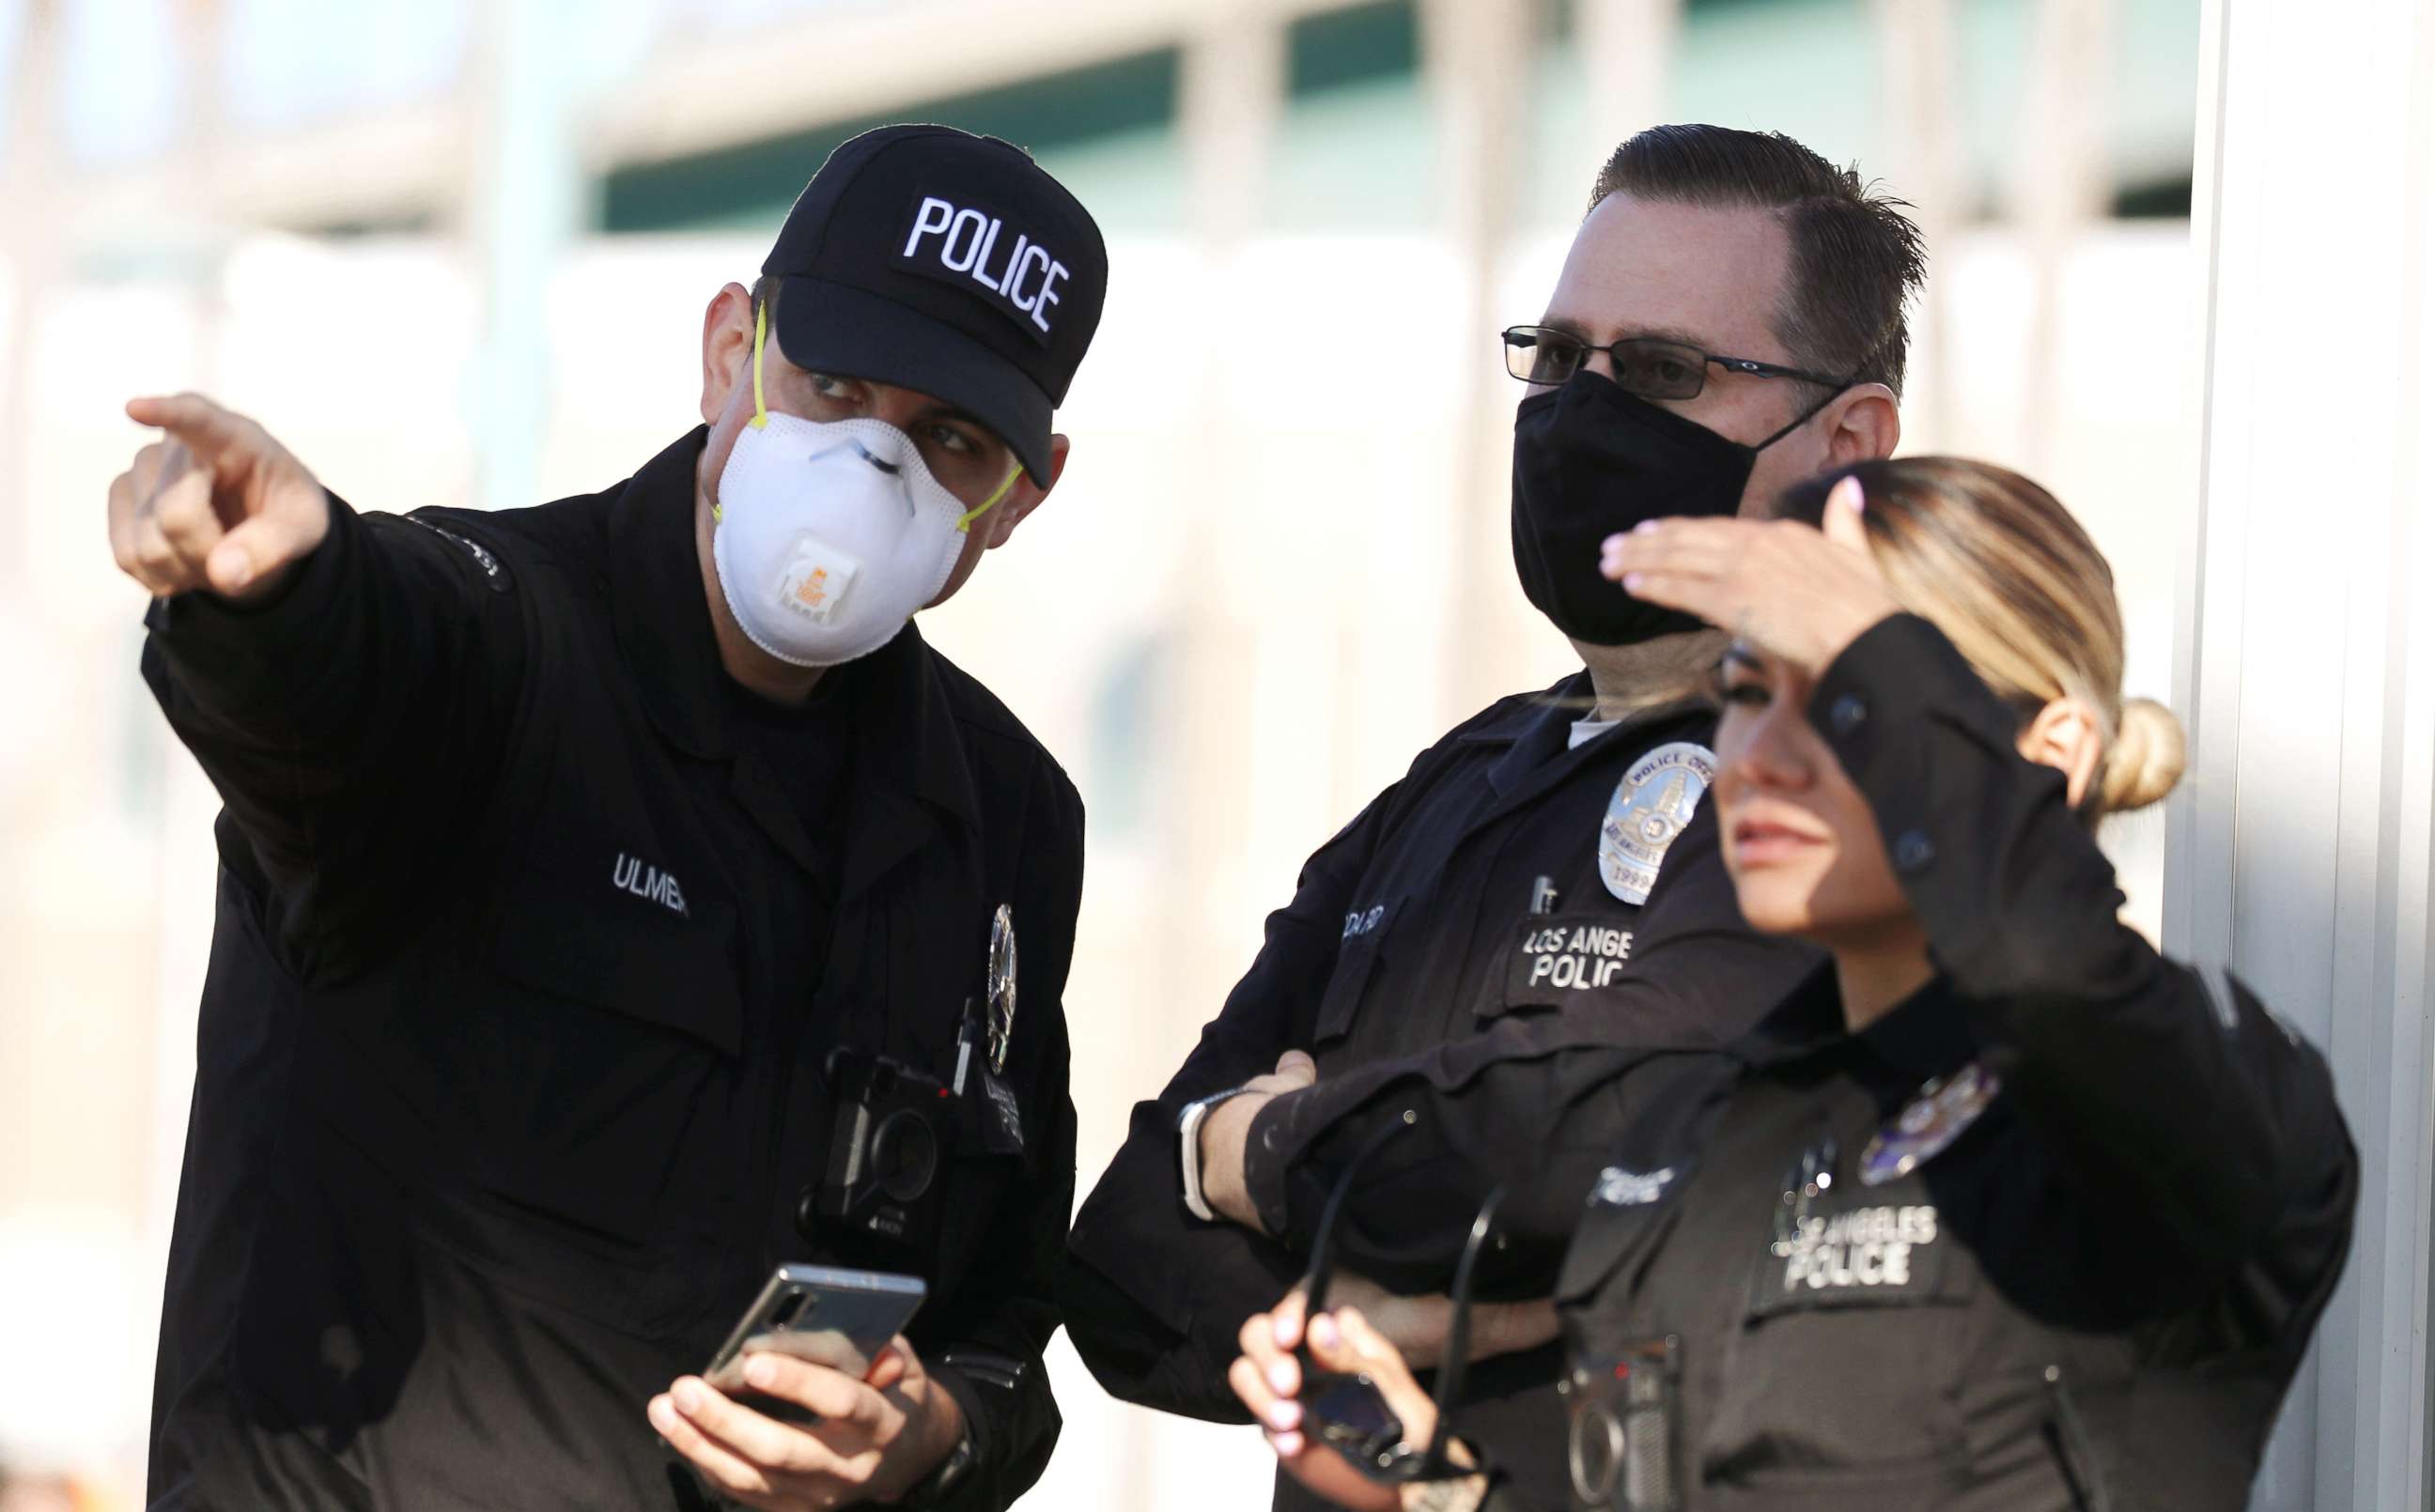 PHOTO: LAPD officers, some wearing masks, keep watch after the USNS Mercy Navy hospital ship arrived in the Port of Los Angeles to assist with the coronavirus pandemic on March 27, 2020 in San Pedro, California. 